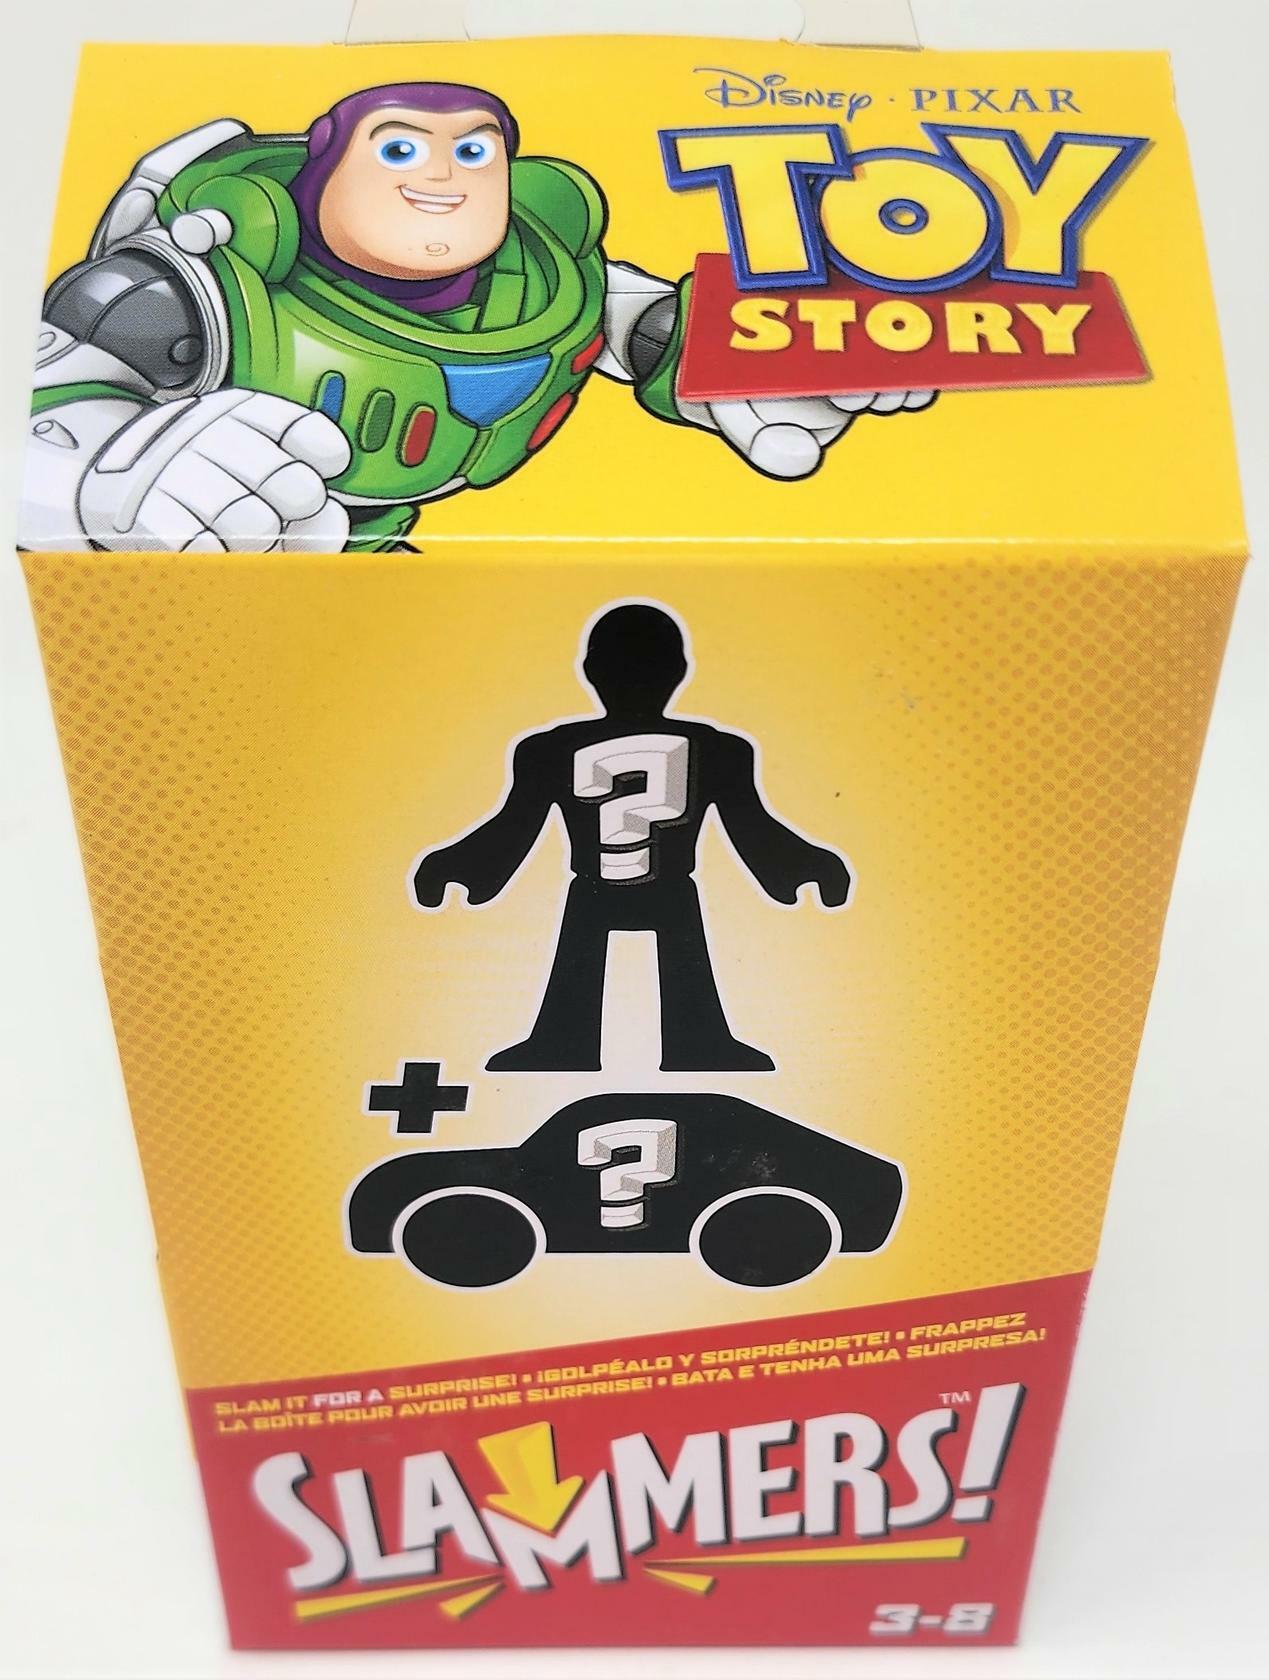 Fisher Price Disney Pixar Toy Store Imaginext Slammers! Buzz or Alien Mystery Box - 1 Randomly Selected